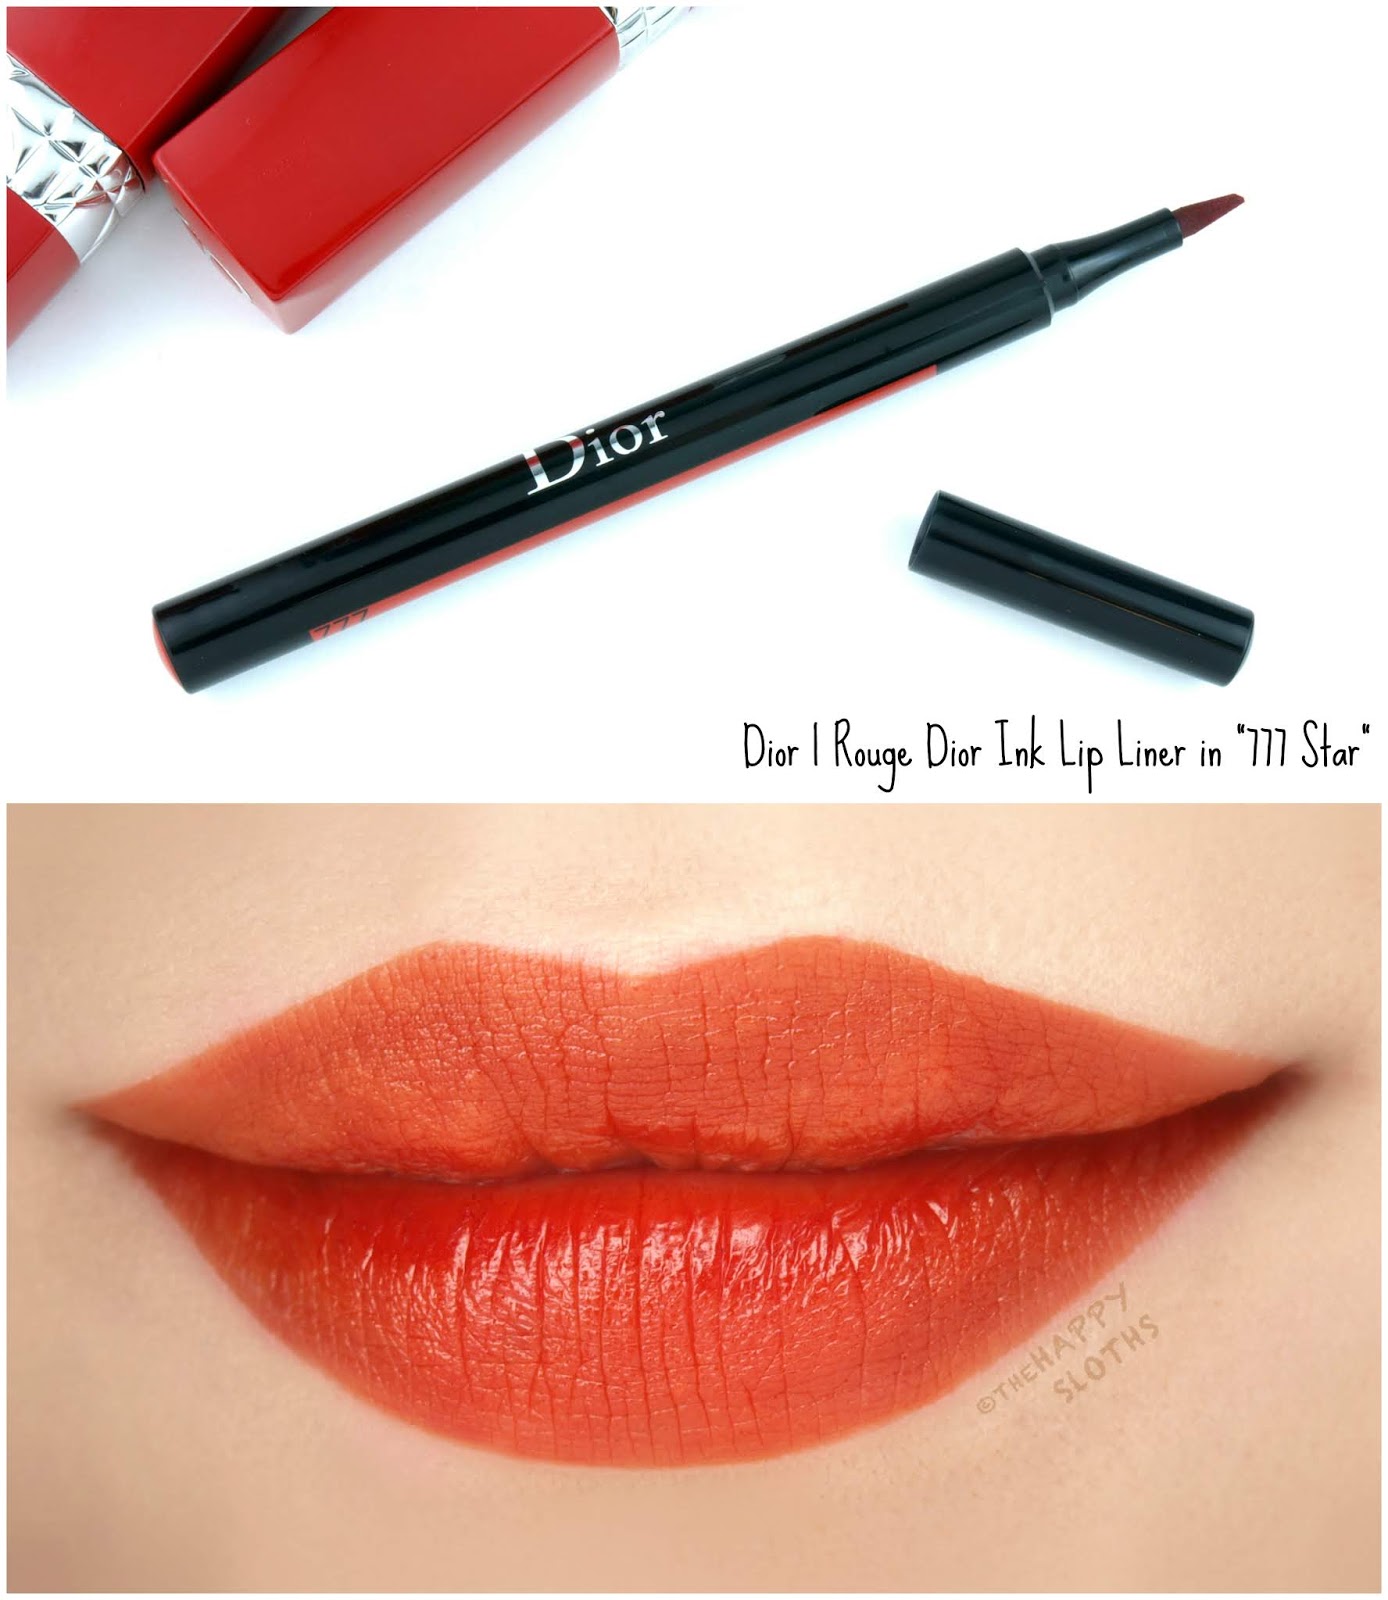 Dior | Rouge Dior Ink Lip Liner in "777 Star": Review and Swatches